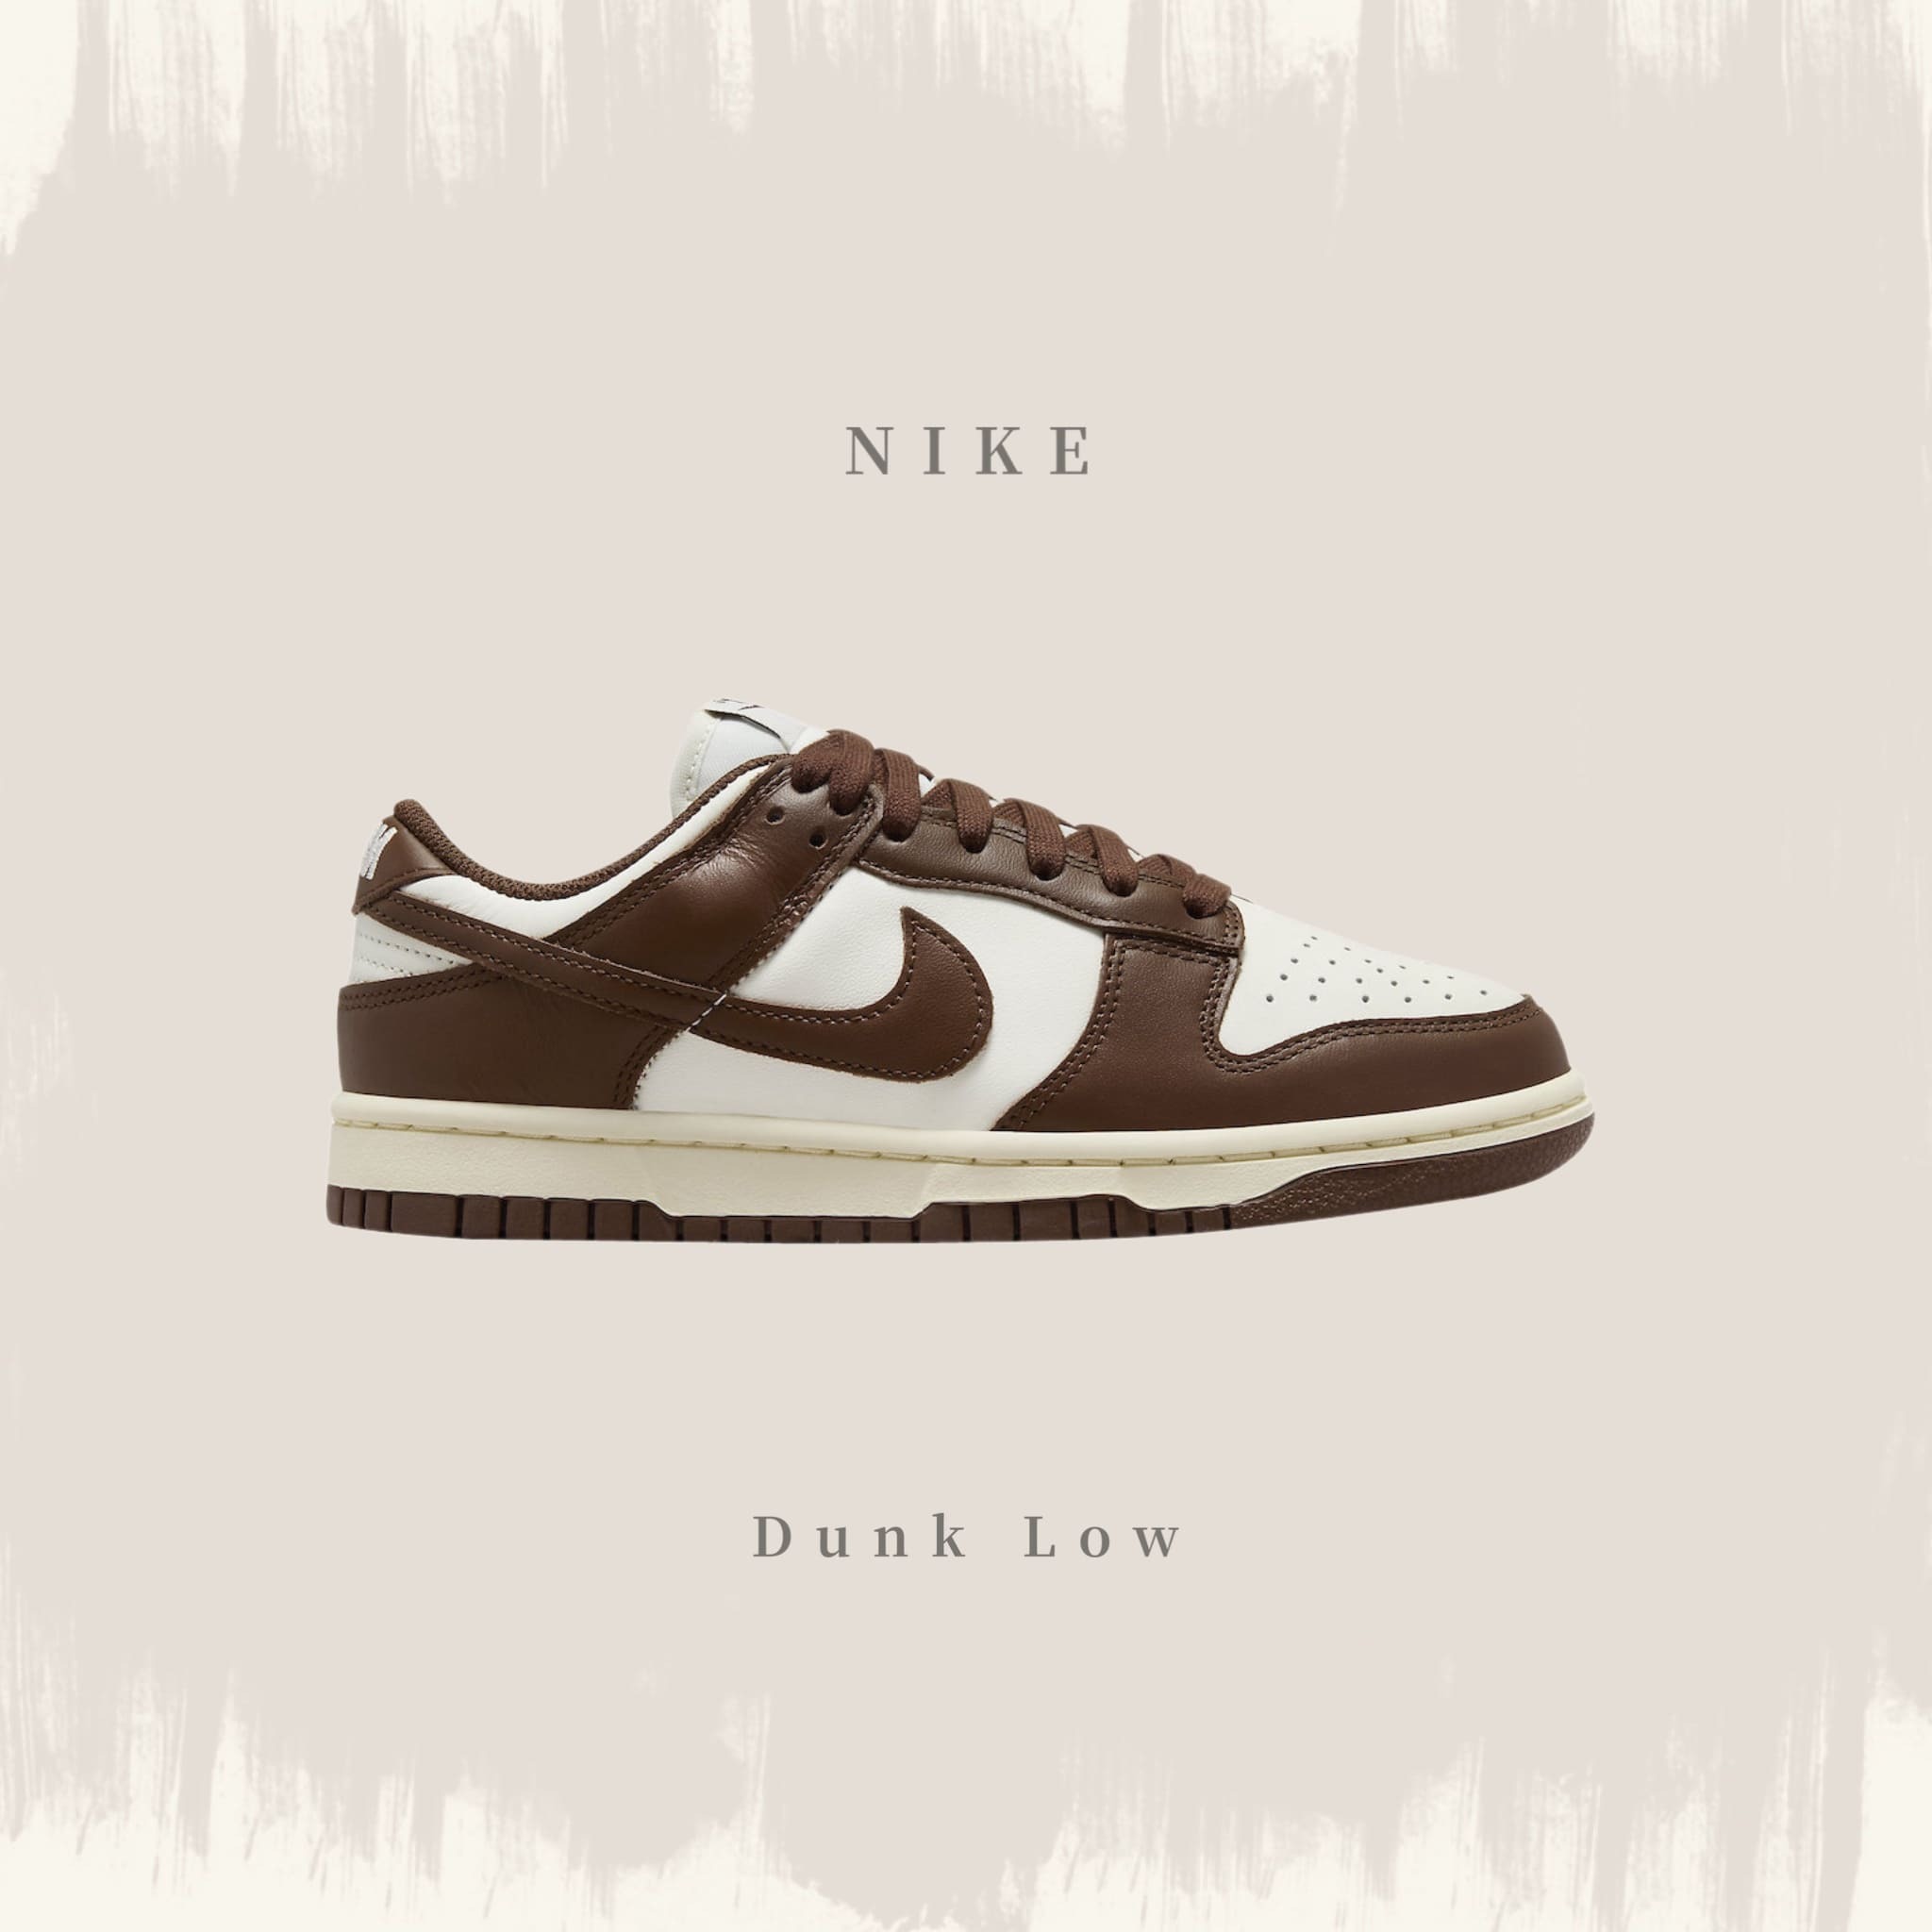 NIKE DUNK LOW CACAO WOW 咖啡可可DD1503-124